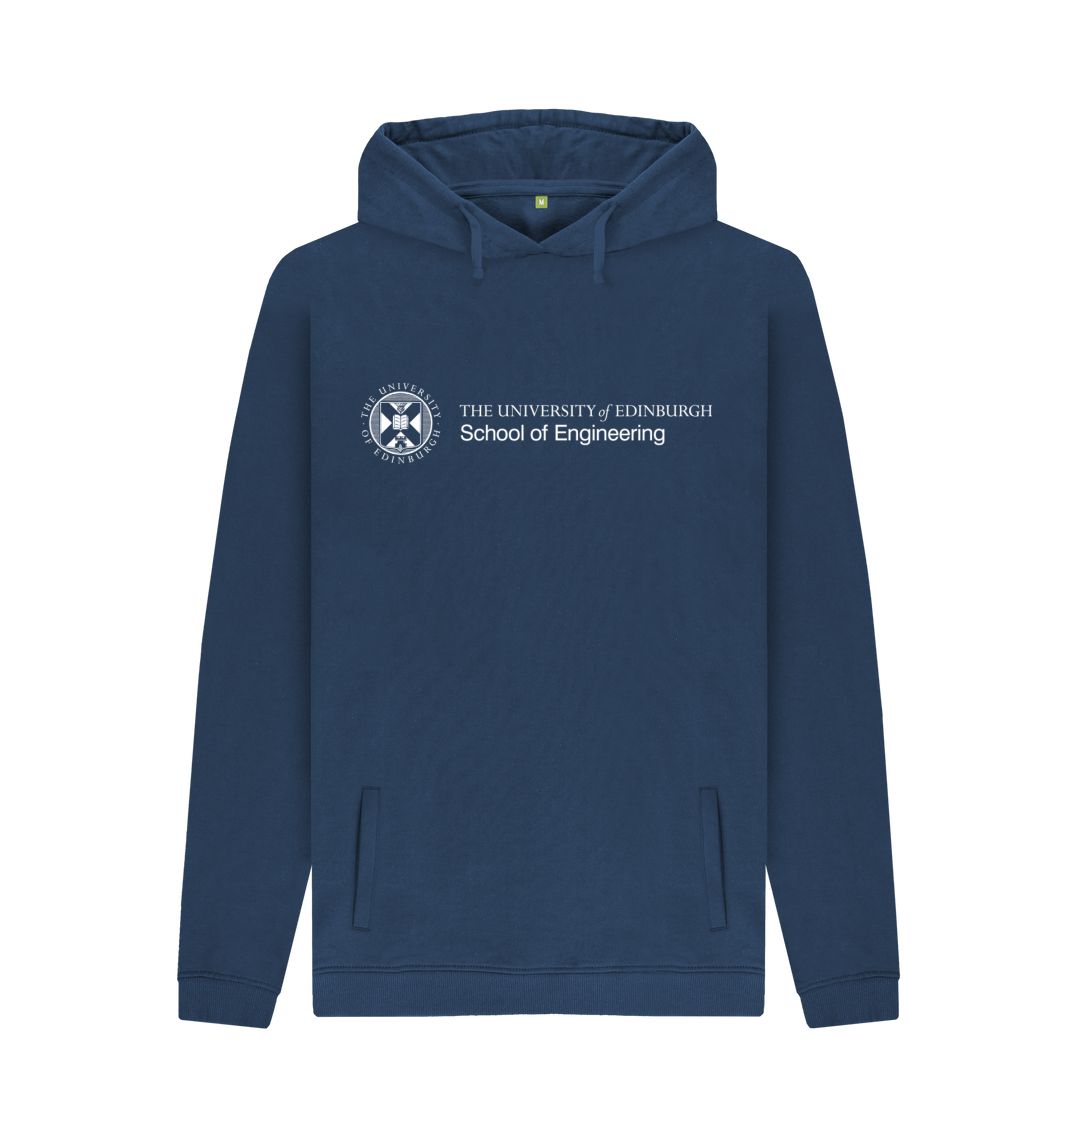 Navy hoodie with white University crest and text that reads ' University of Edinburgh School of Engineering